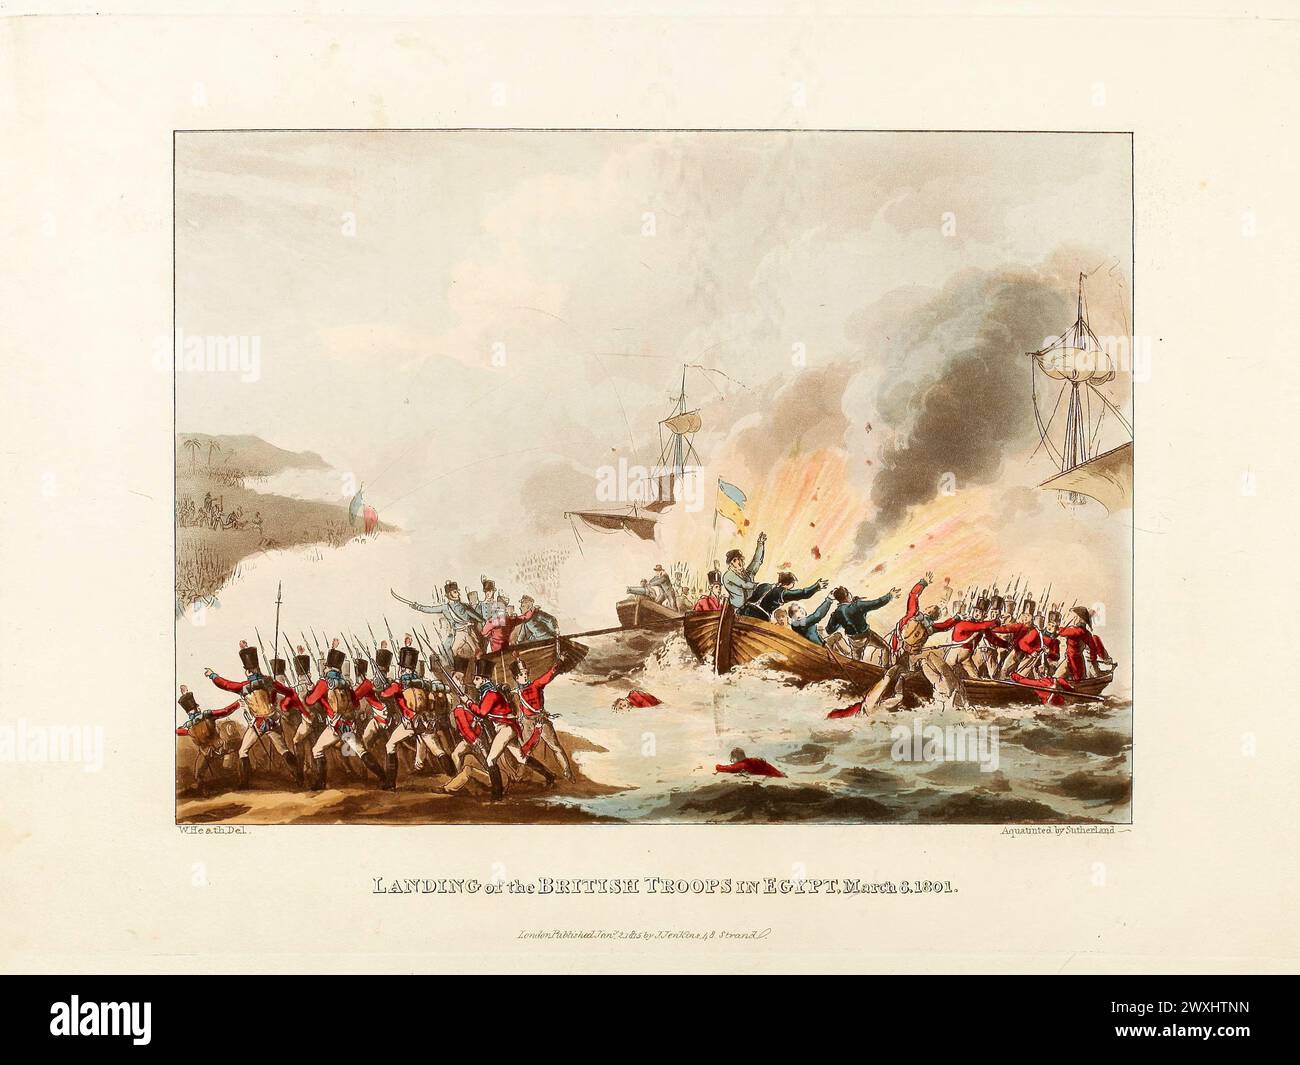 Landing of the British Troops in Egypt, March 8, 1801. Vintage Coloured Aquatint published by James Jenkins, 1815,  from  The martial achievements of Great Britain and her allies : from 1799 to 1815. Stock Photo